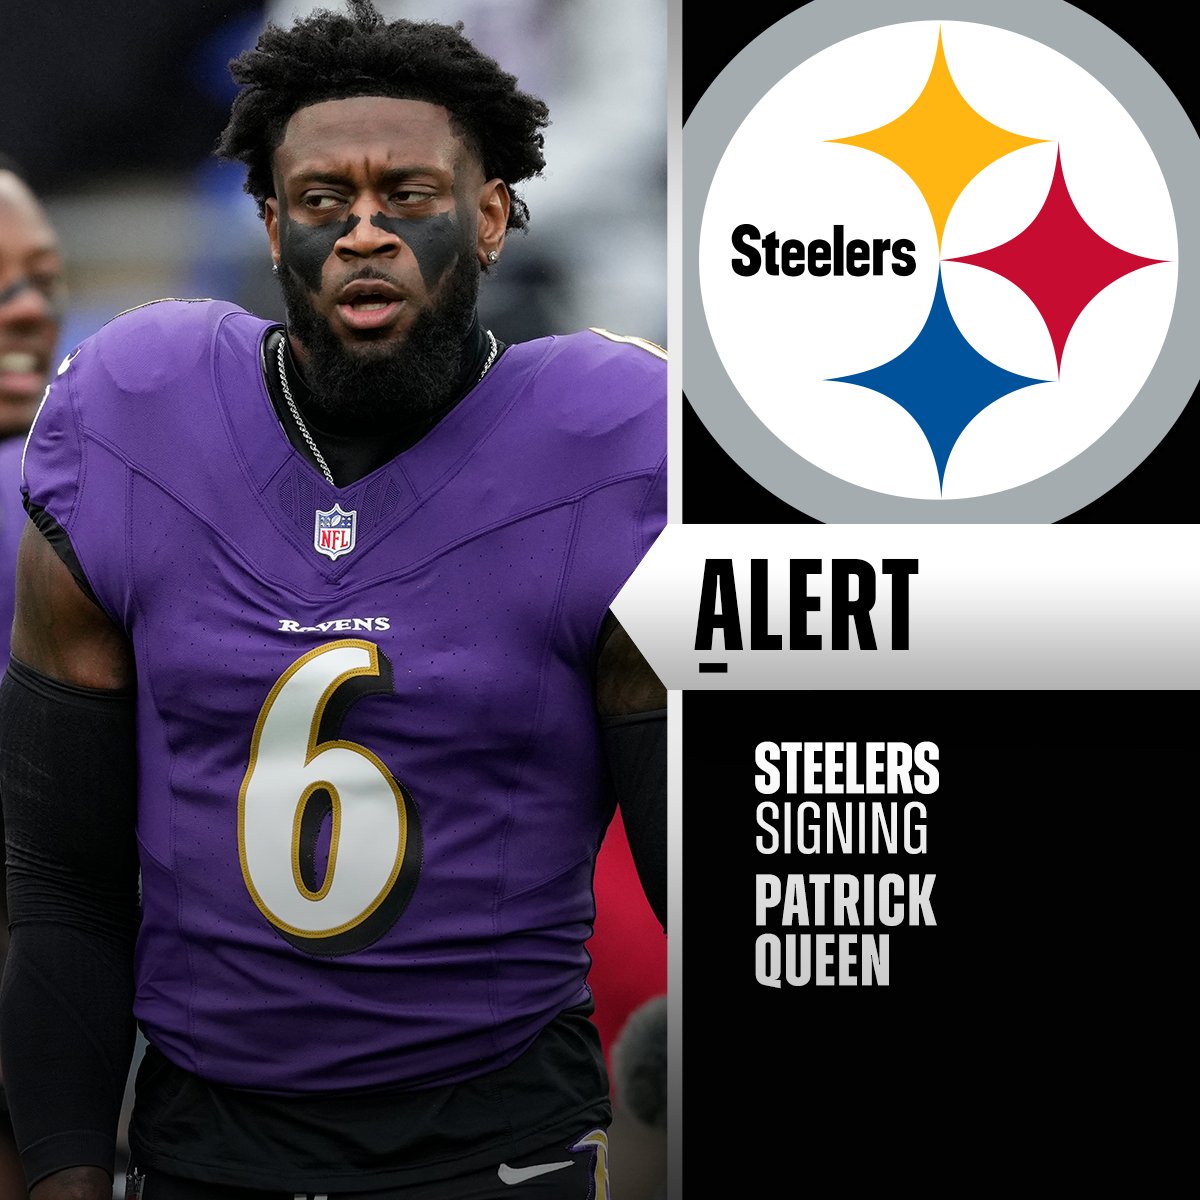 Steelers agree to 3-year, $41M deal with LB Patrick Queen. (via @RapSheet)